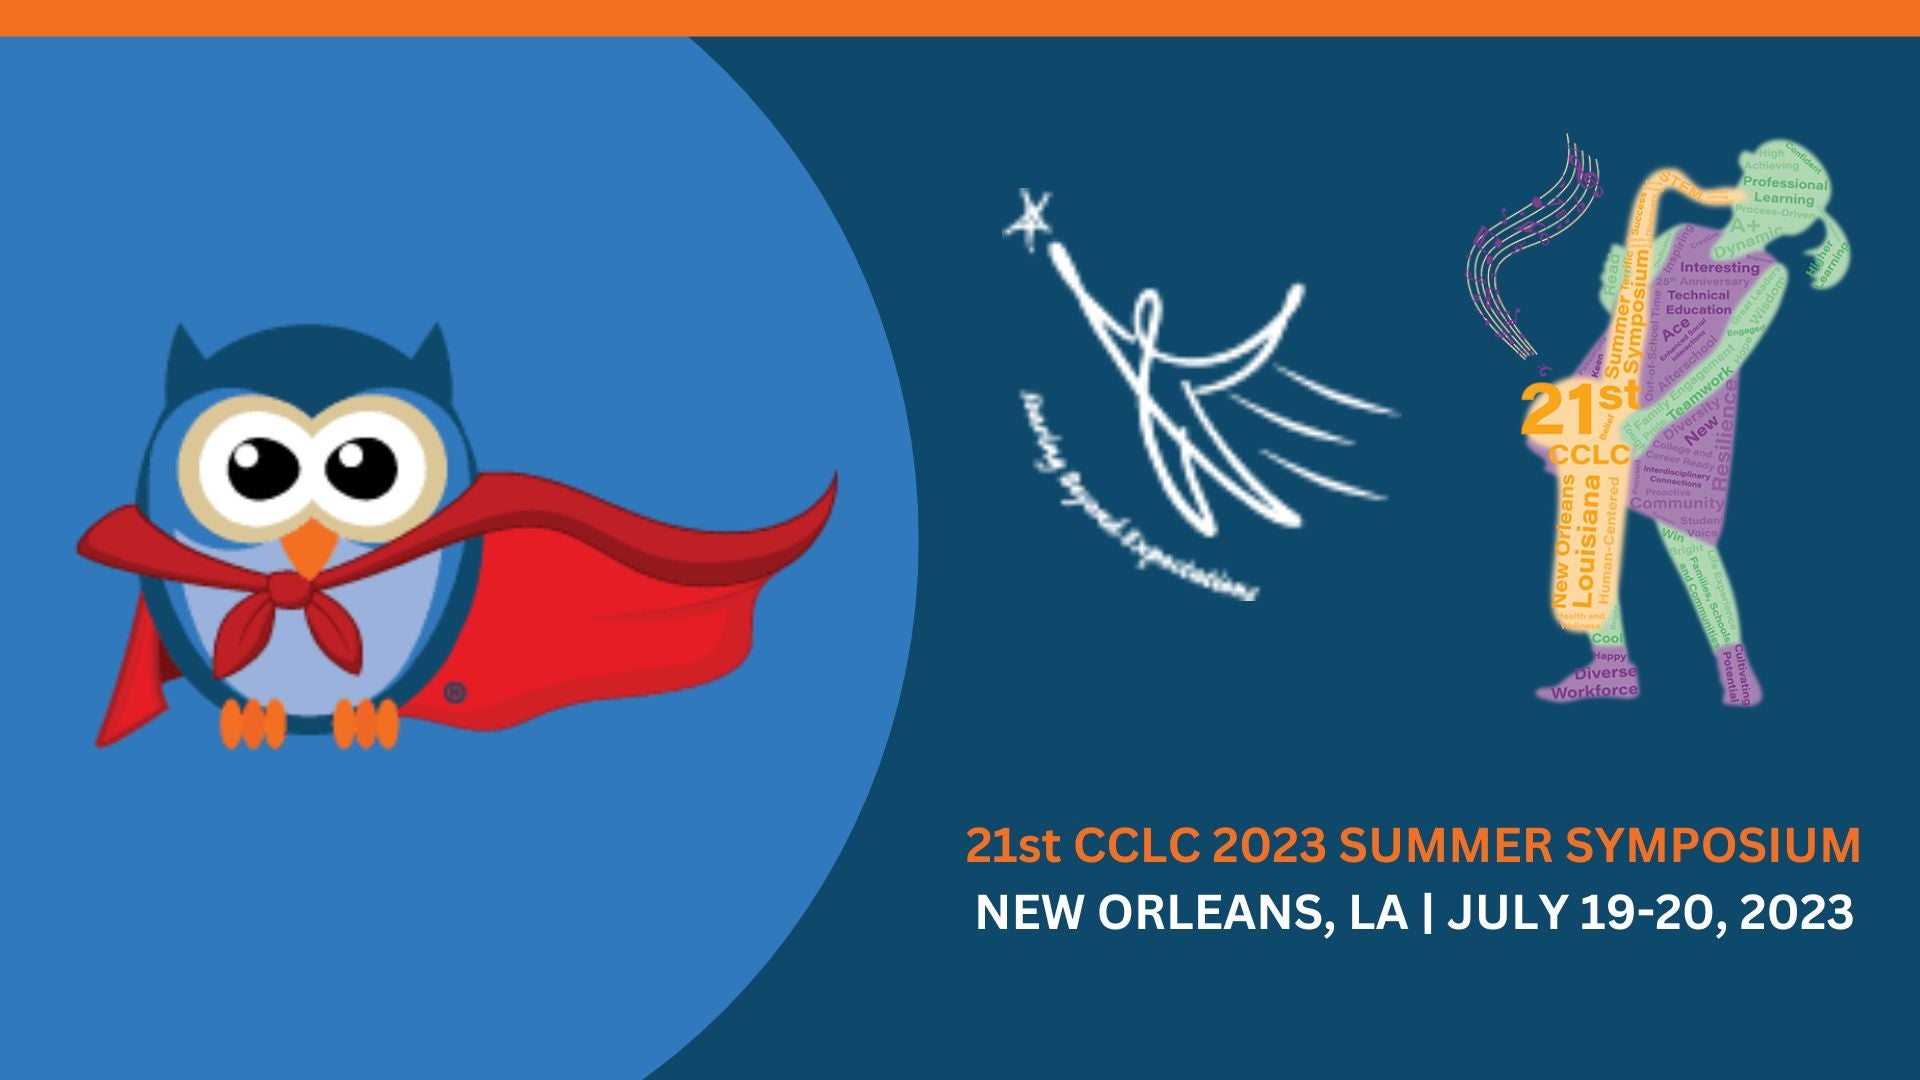 Our team is in New Orleans this week for the 2023 21st CCLC Summer Sym